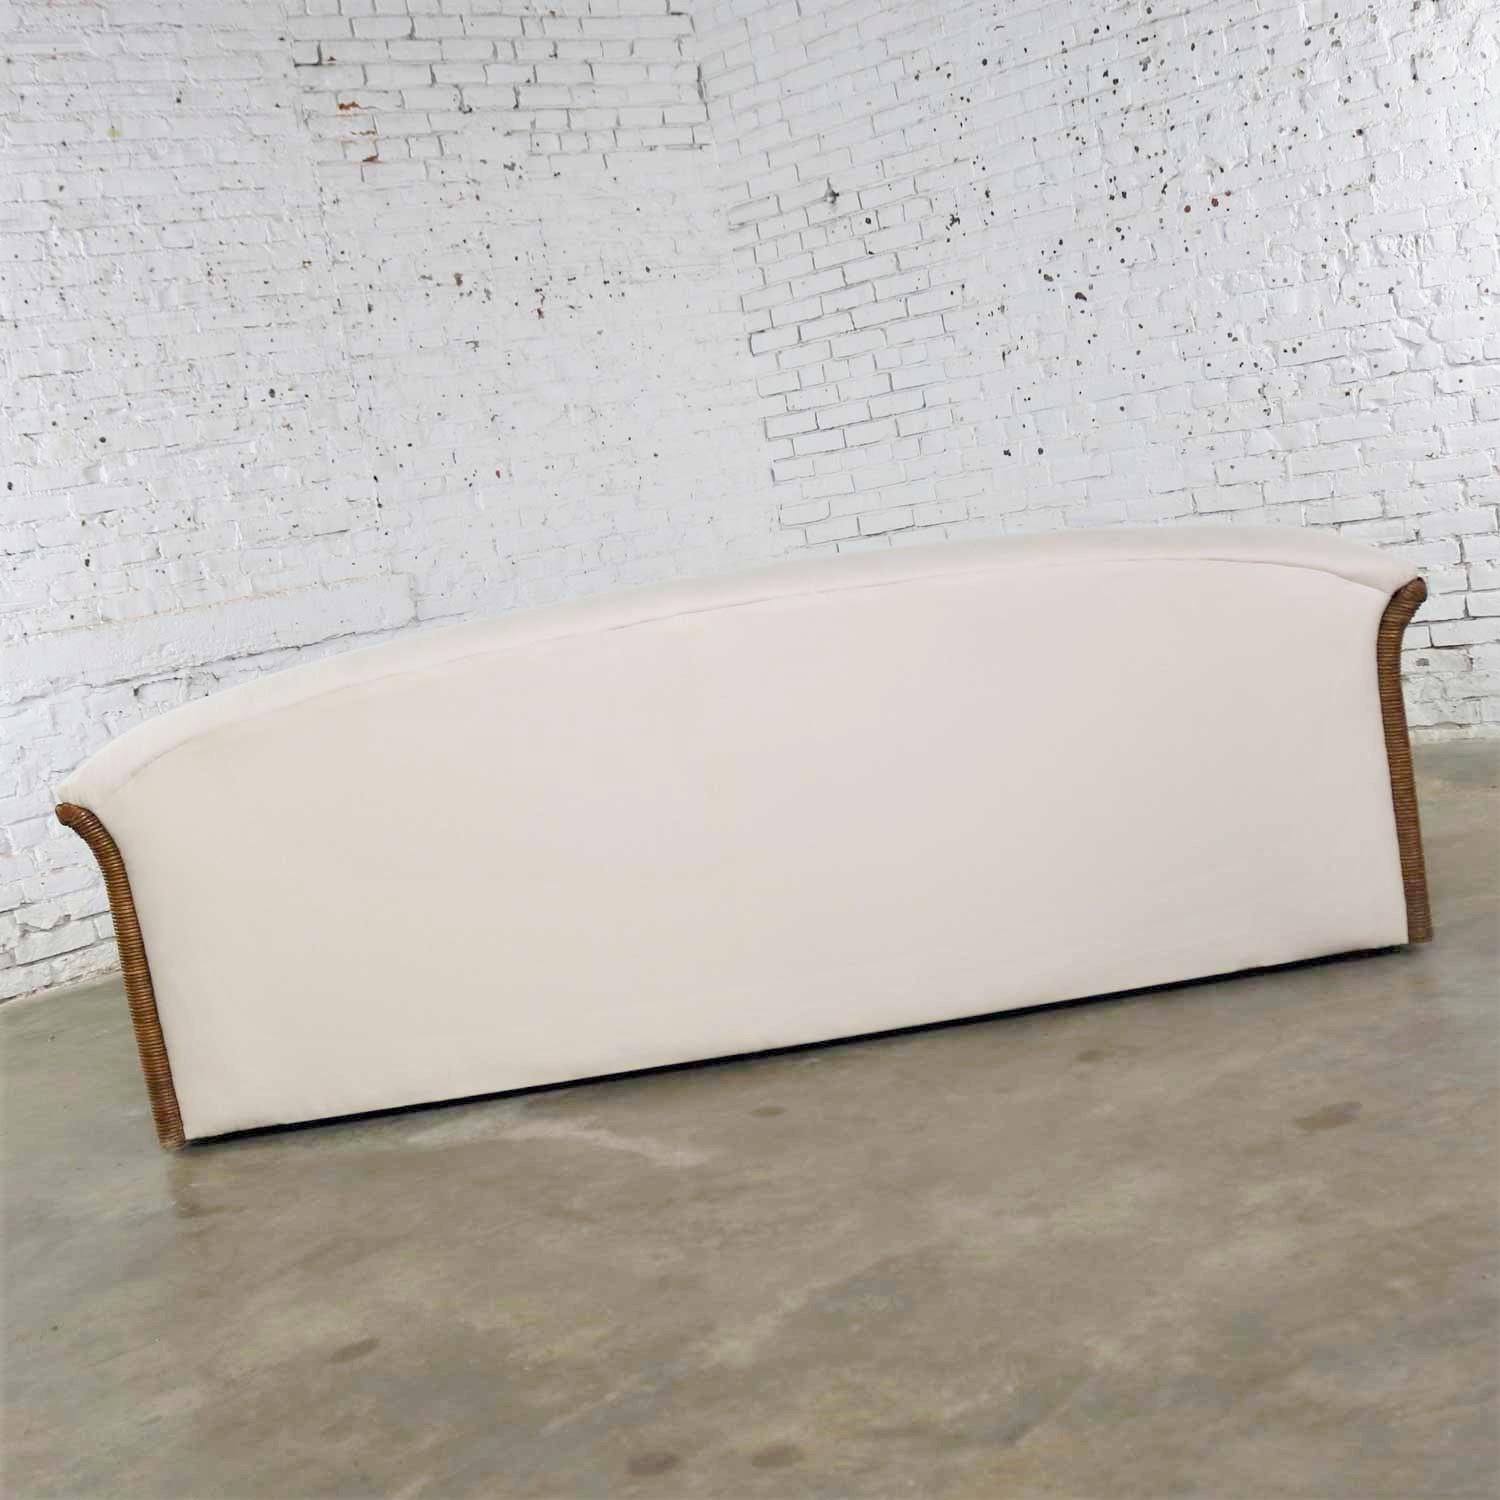 Vintage Modern Wicker Sofa Manner Michael Taylor in New White Canvas 4